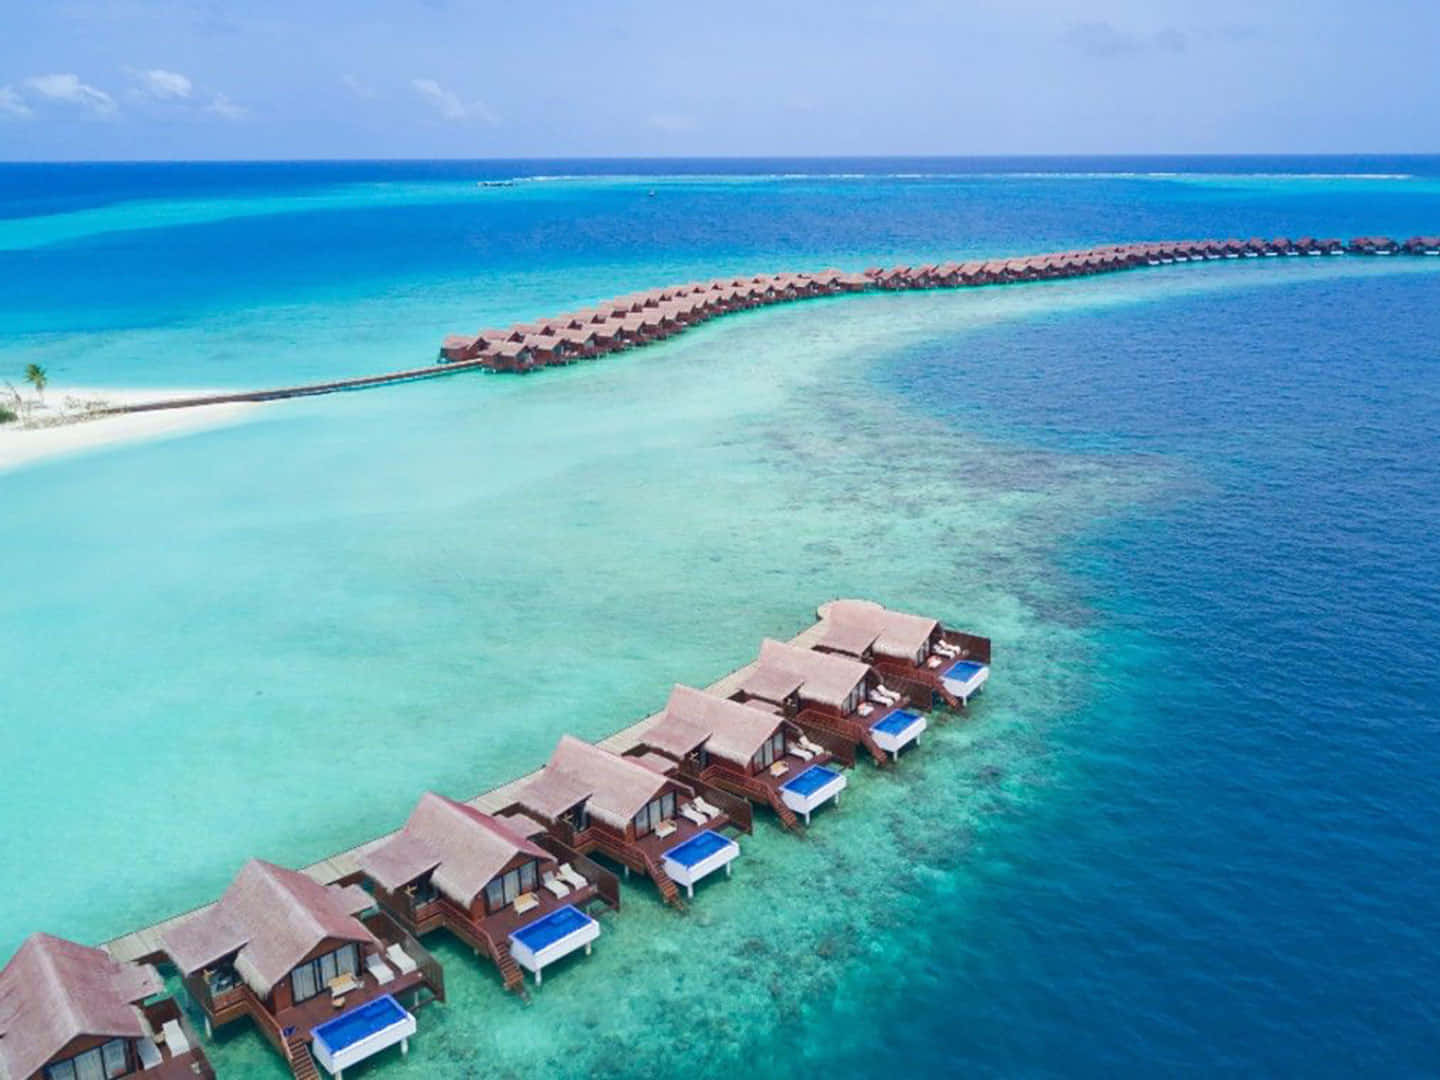 Feel the Beauty of Nature at the Maldives